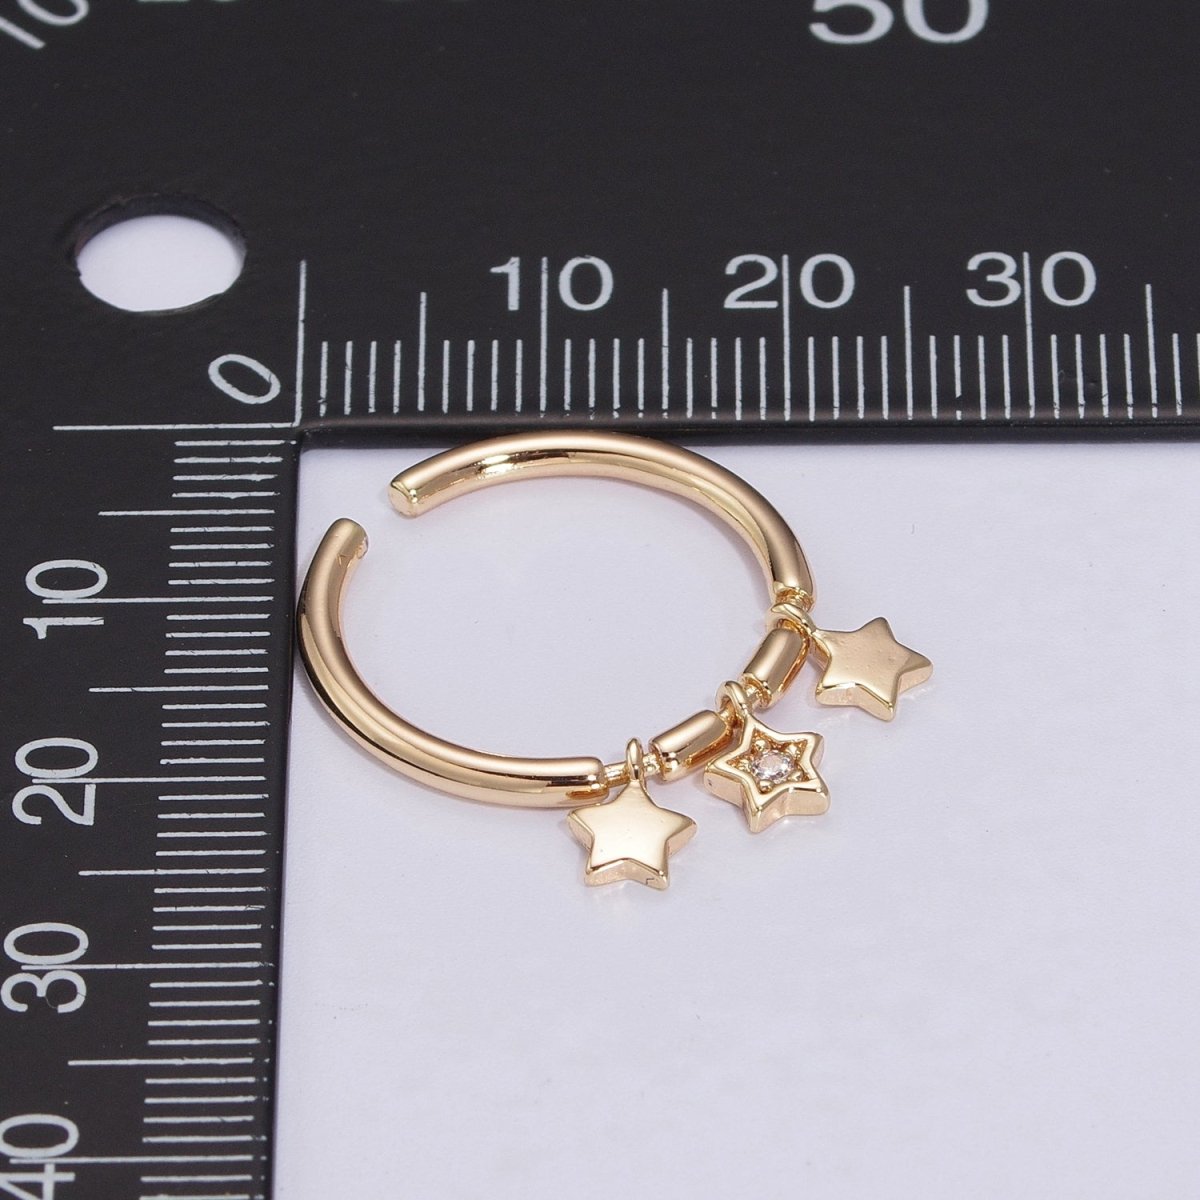 Twinkle Little Star Ring- Dainty Star Ring, 18K Gold Filled Ring, Dangly Star Stacking Ring Charm U-098 - DLUXCA